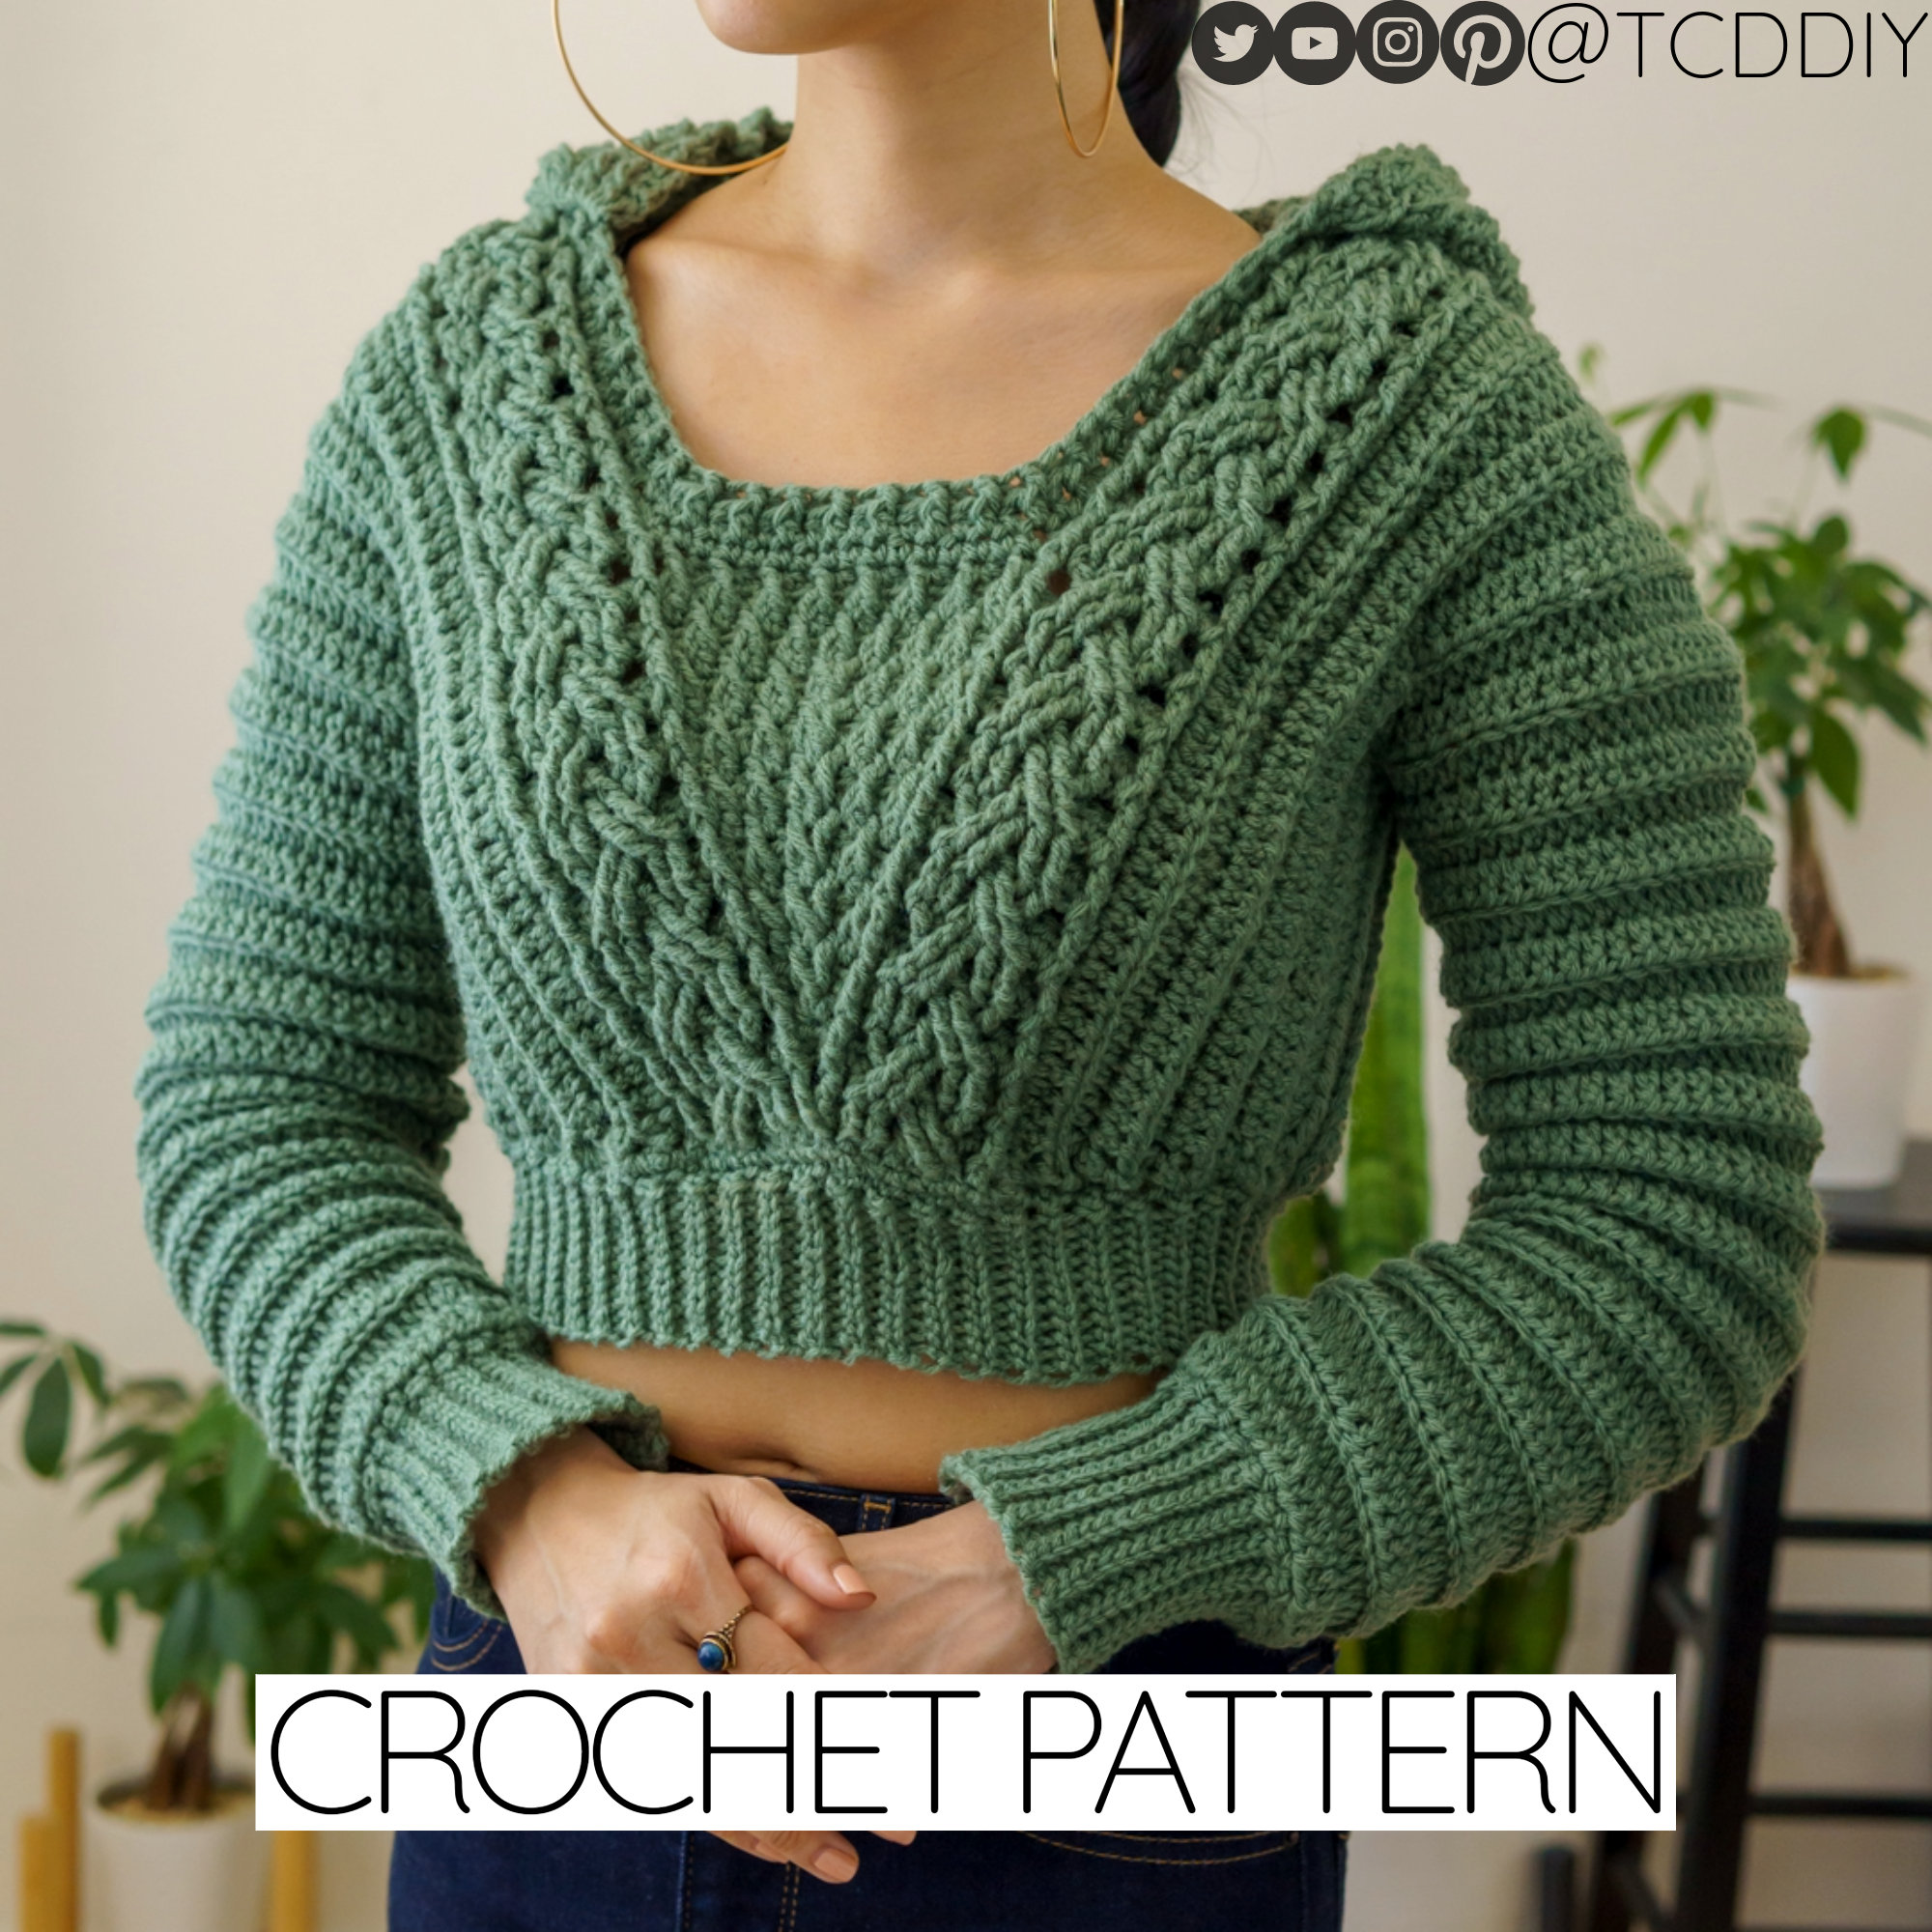 10 Free Crochet Cable Pattern Ideas To Try - Blue Star Crochet